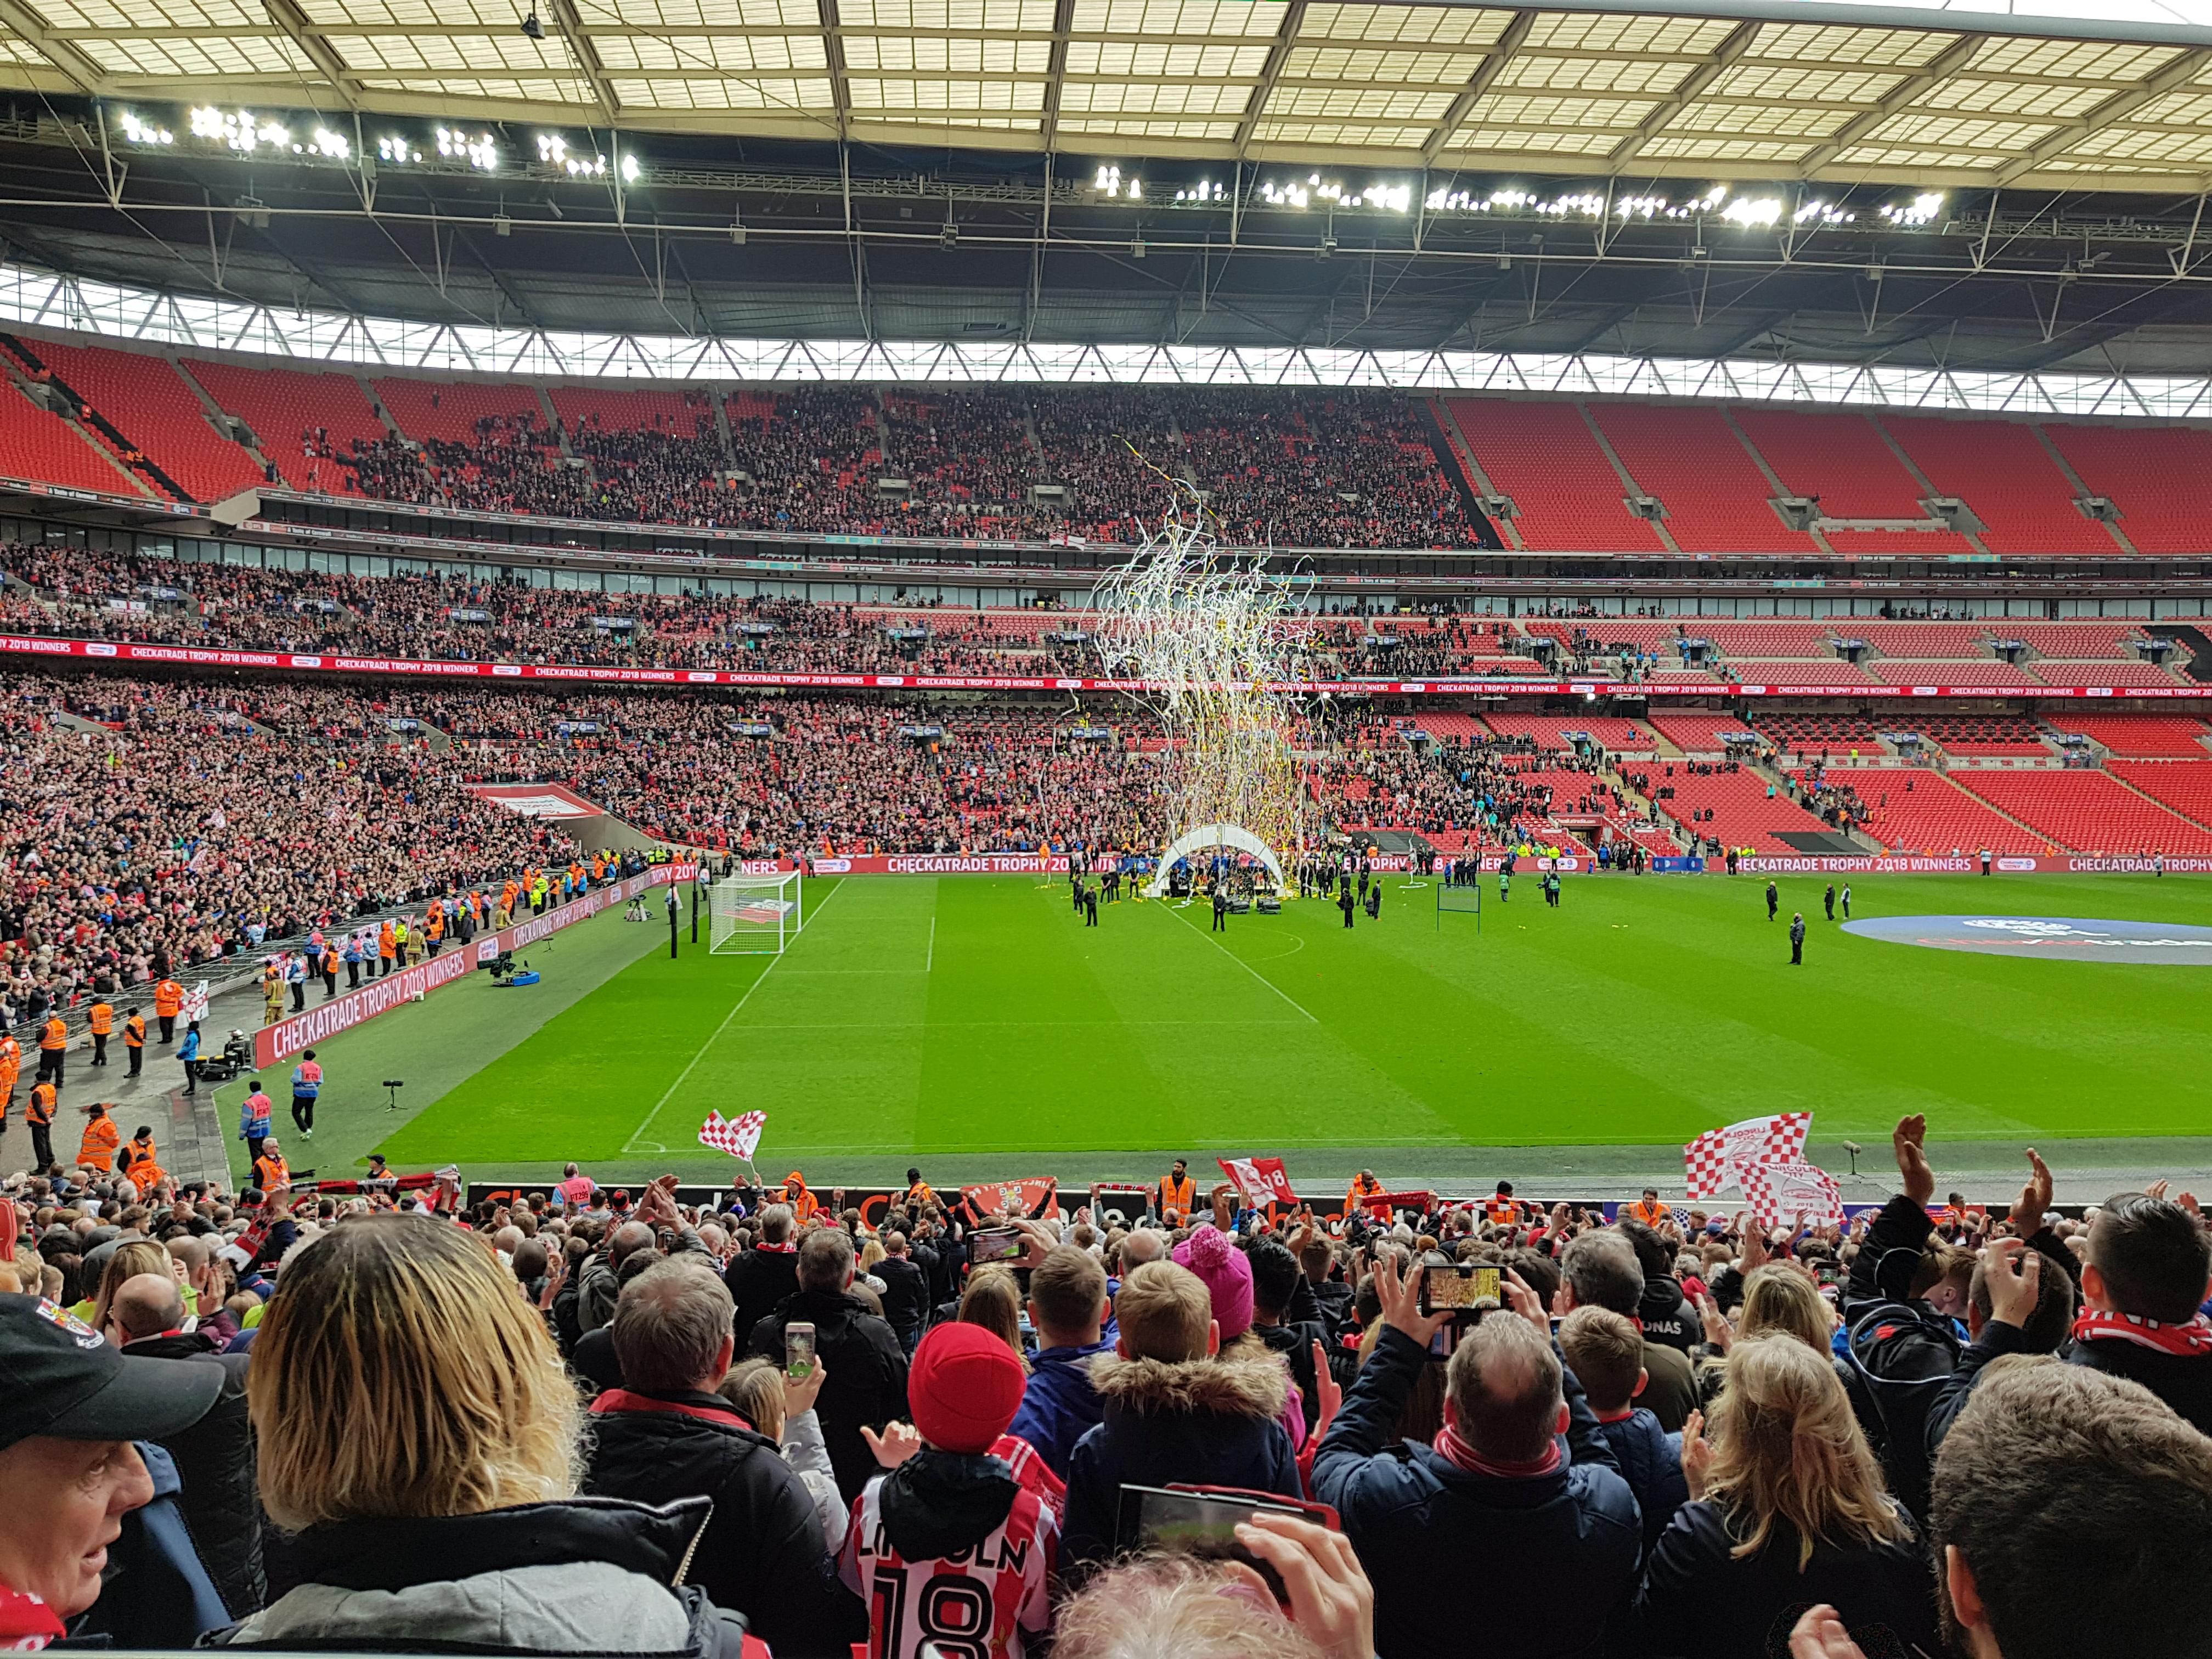 Watching the Mighty Imps at Wembley